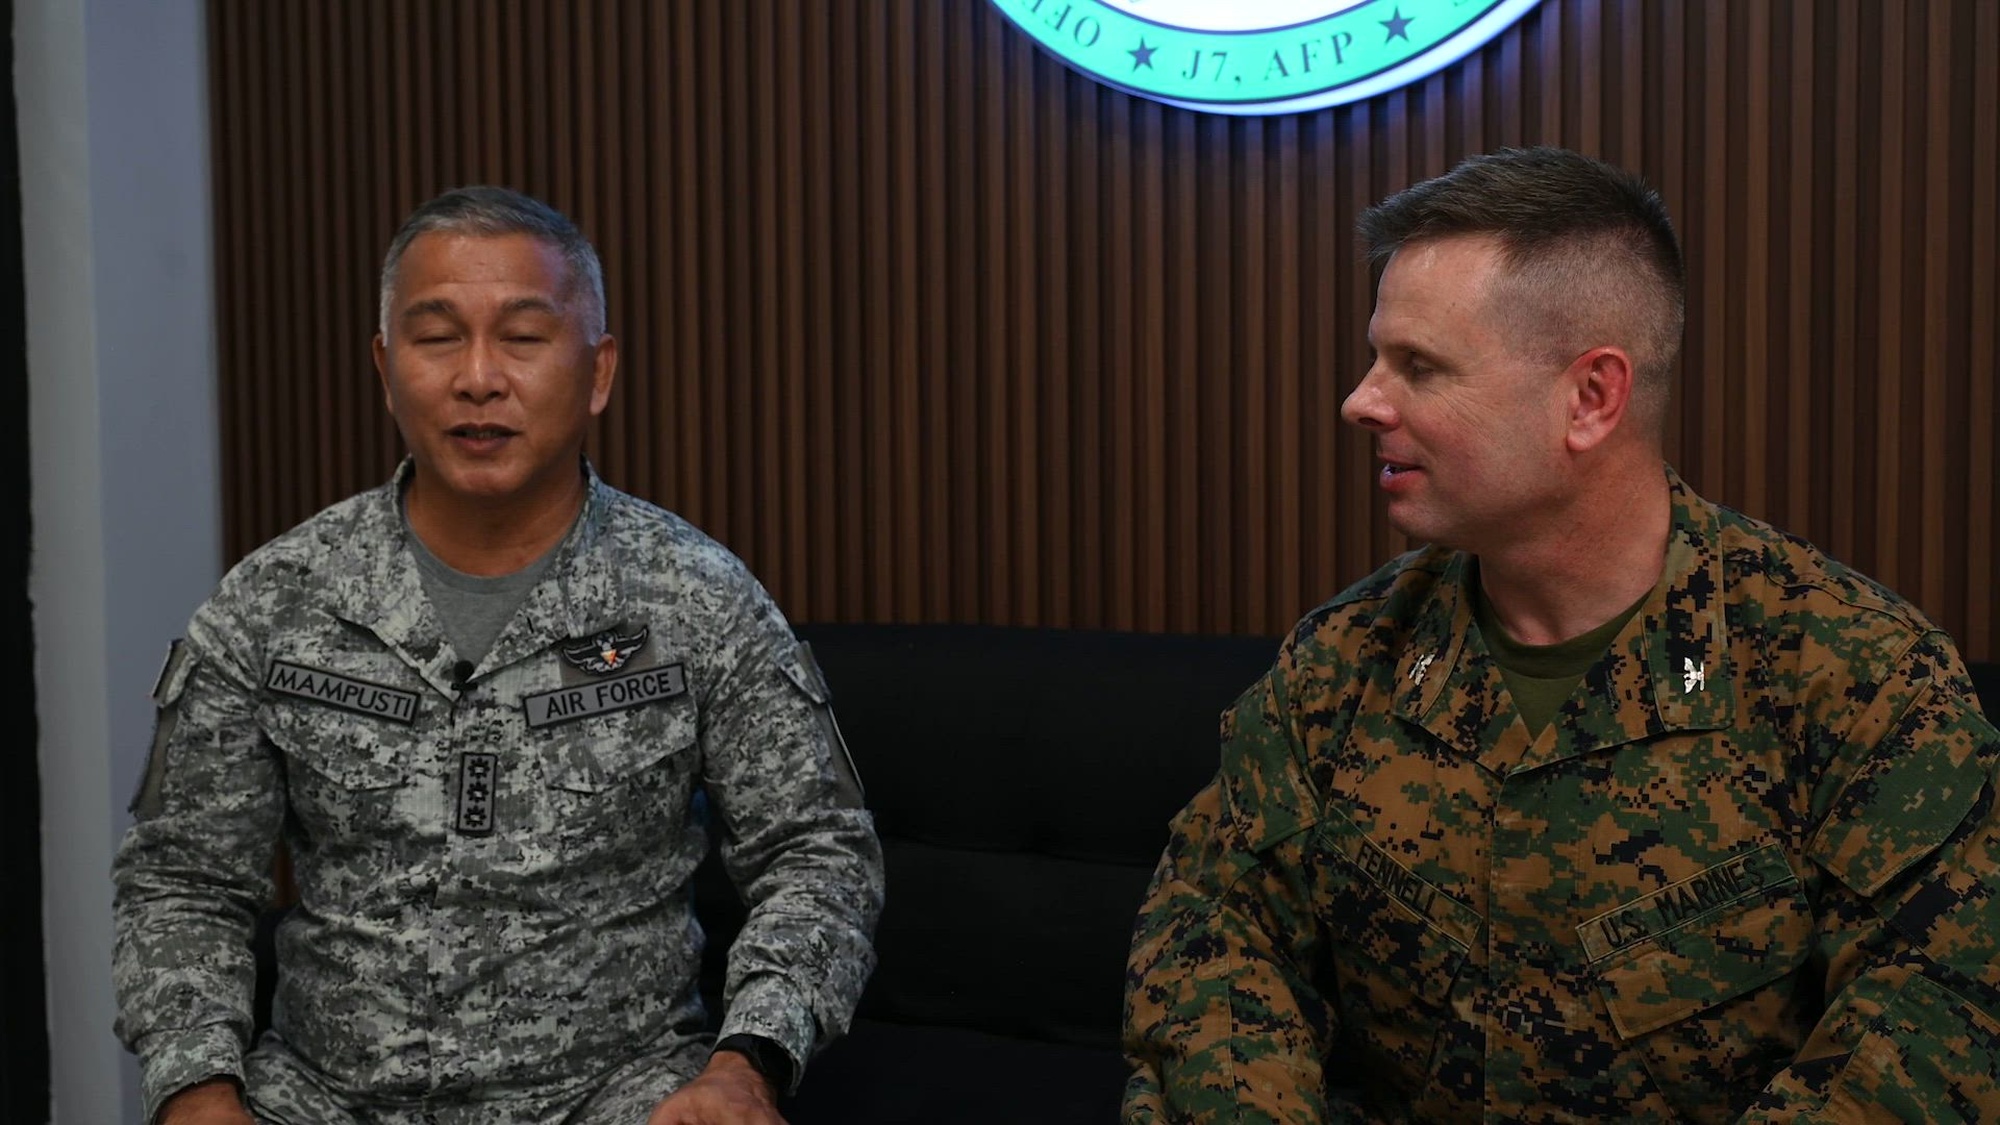 U.S. Marine Col. David Fennell, commanding officer of the 1st Civil Affairs Group and Philippine Air Force Col. Arman Mampusti, head of the civil military relations division, discuss civil affairs and the Combined Joint Civil Military Task Force during Exercise Balikatan 24 at Camp Aguinaldo, Philippines, April 29, 2024. BK 24 is an annual exercise between the Armed Forces of the Philippines and the U.S. military designed to strengthen bilateral interoperability, capabilities, trust, and cooperation built over decades of shared experiences. (U.S. Air Force video by Airman 1st Class Spencer Perkins)